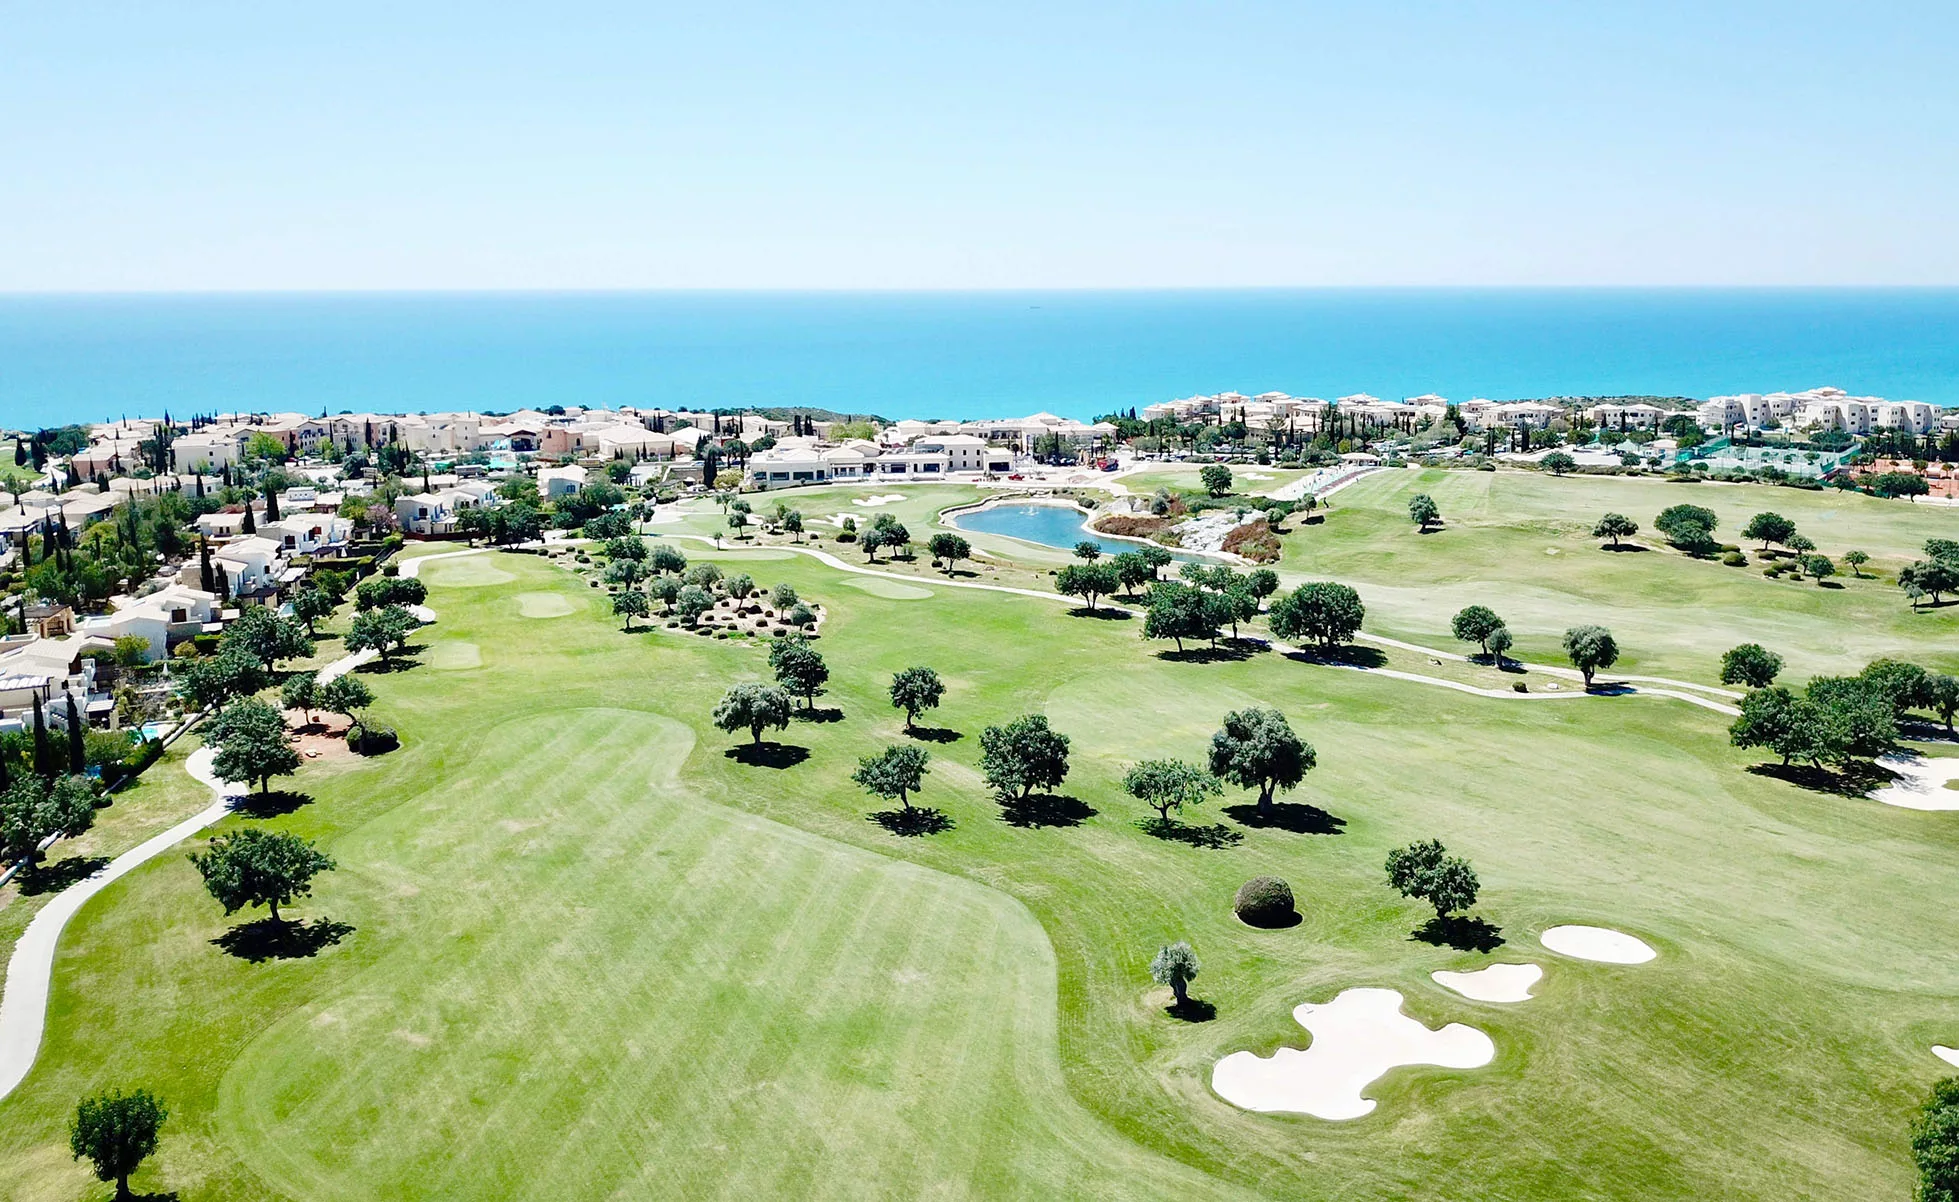 Aerial view of the 1st, 10th and 18th holes at Aphrodite Hills resort, with properties surrounding and Mediterranean Sea in the background.